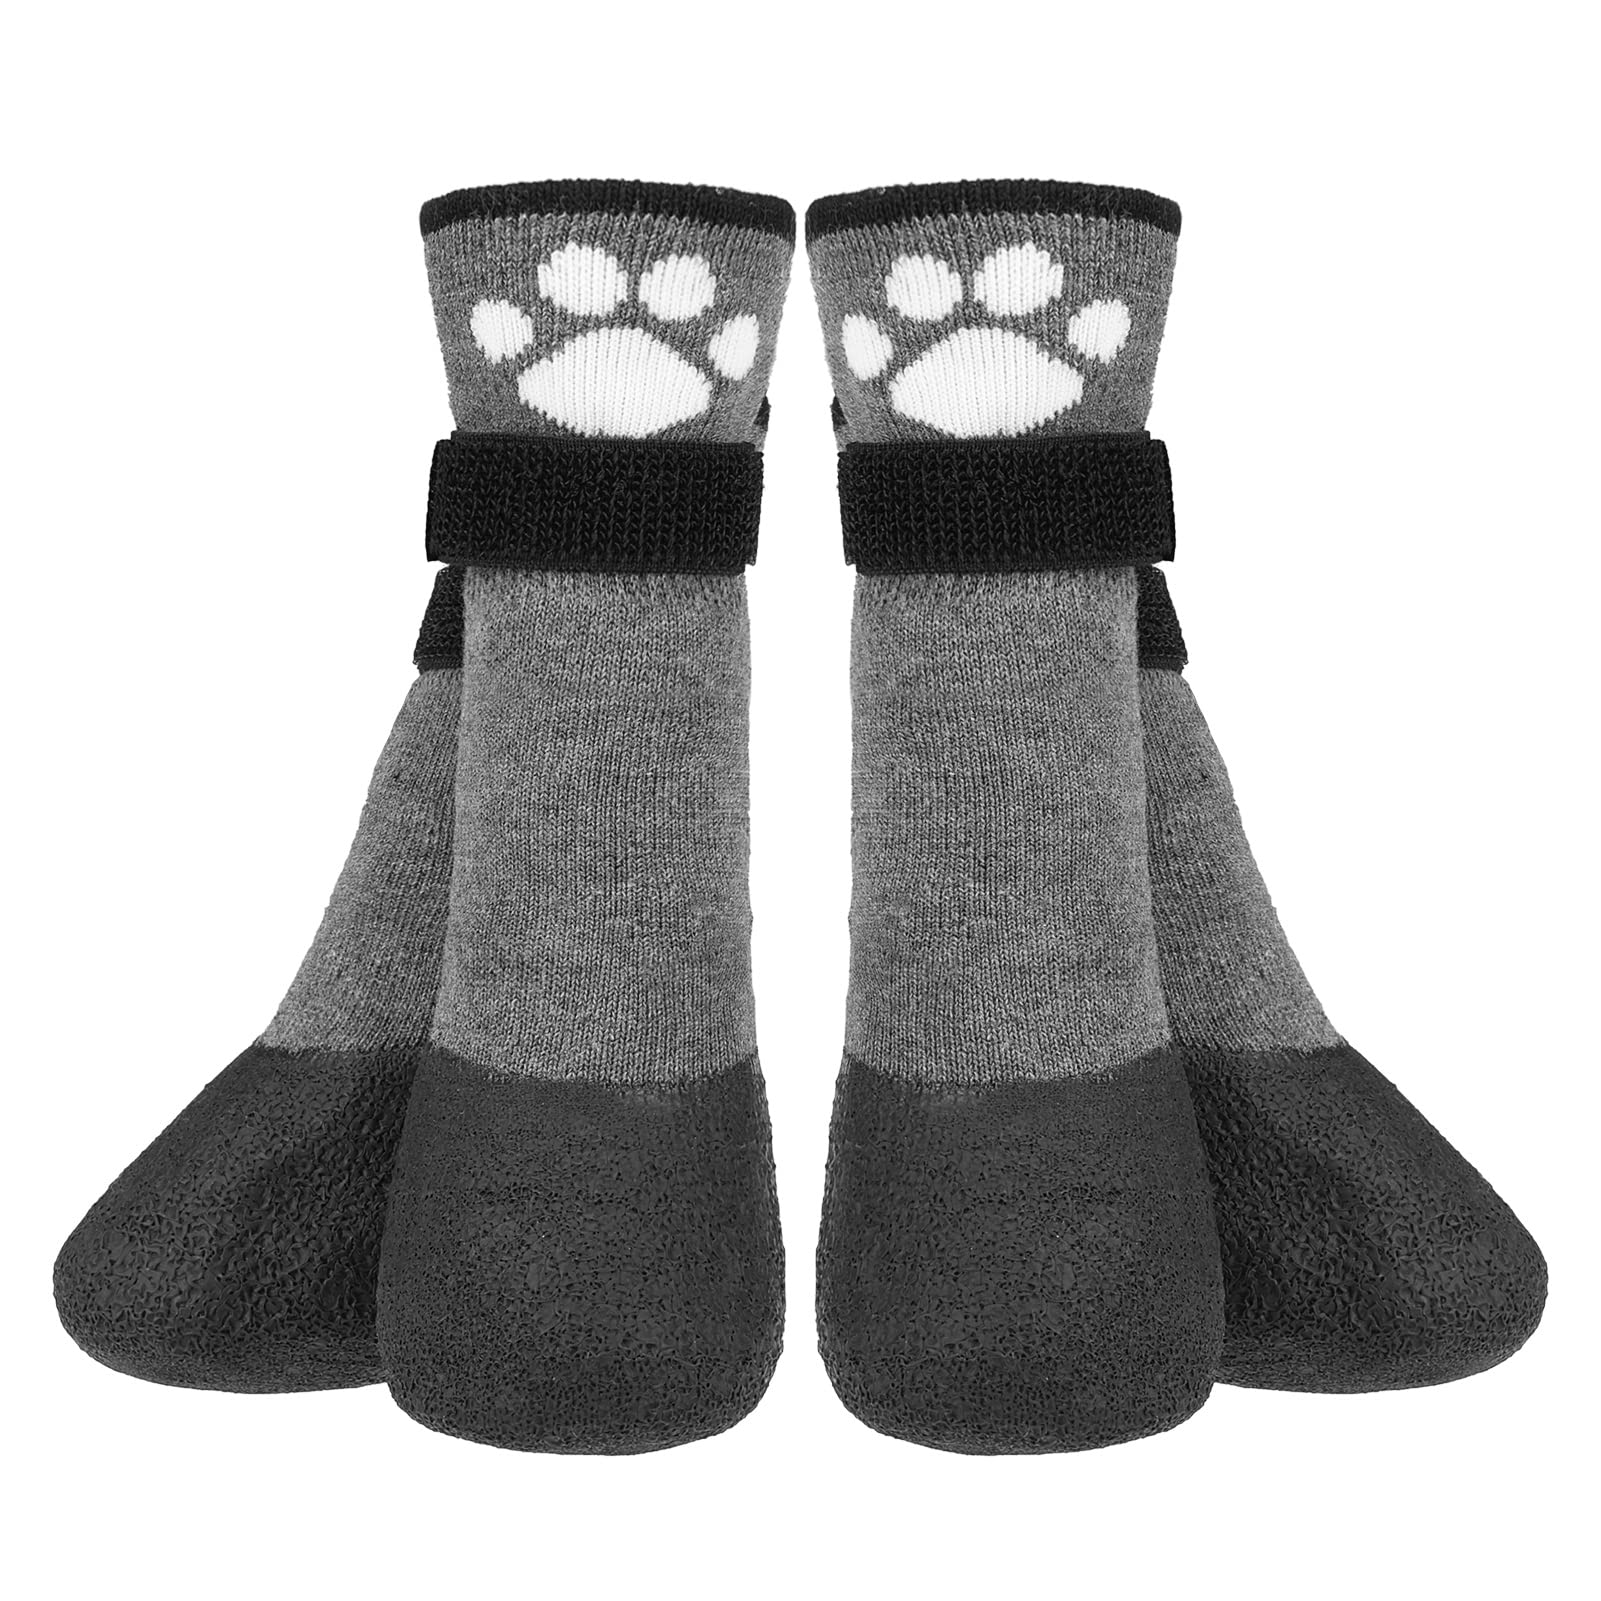 BEAUTYZOO Dog Paw Protectors Grip Pads Anti-Slip Traction for